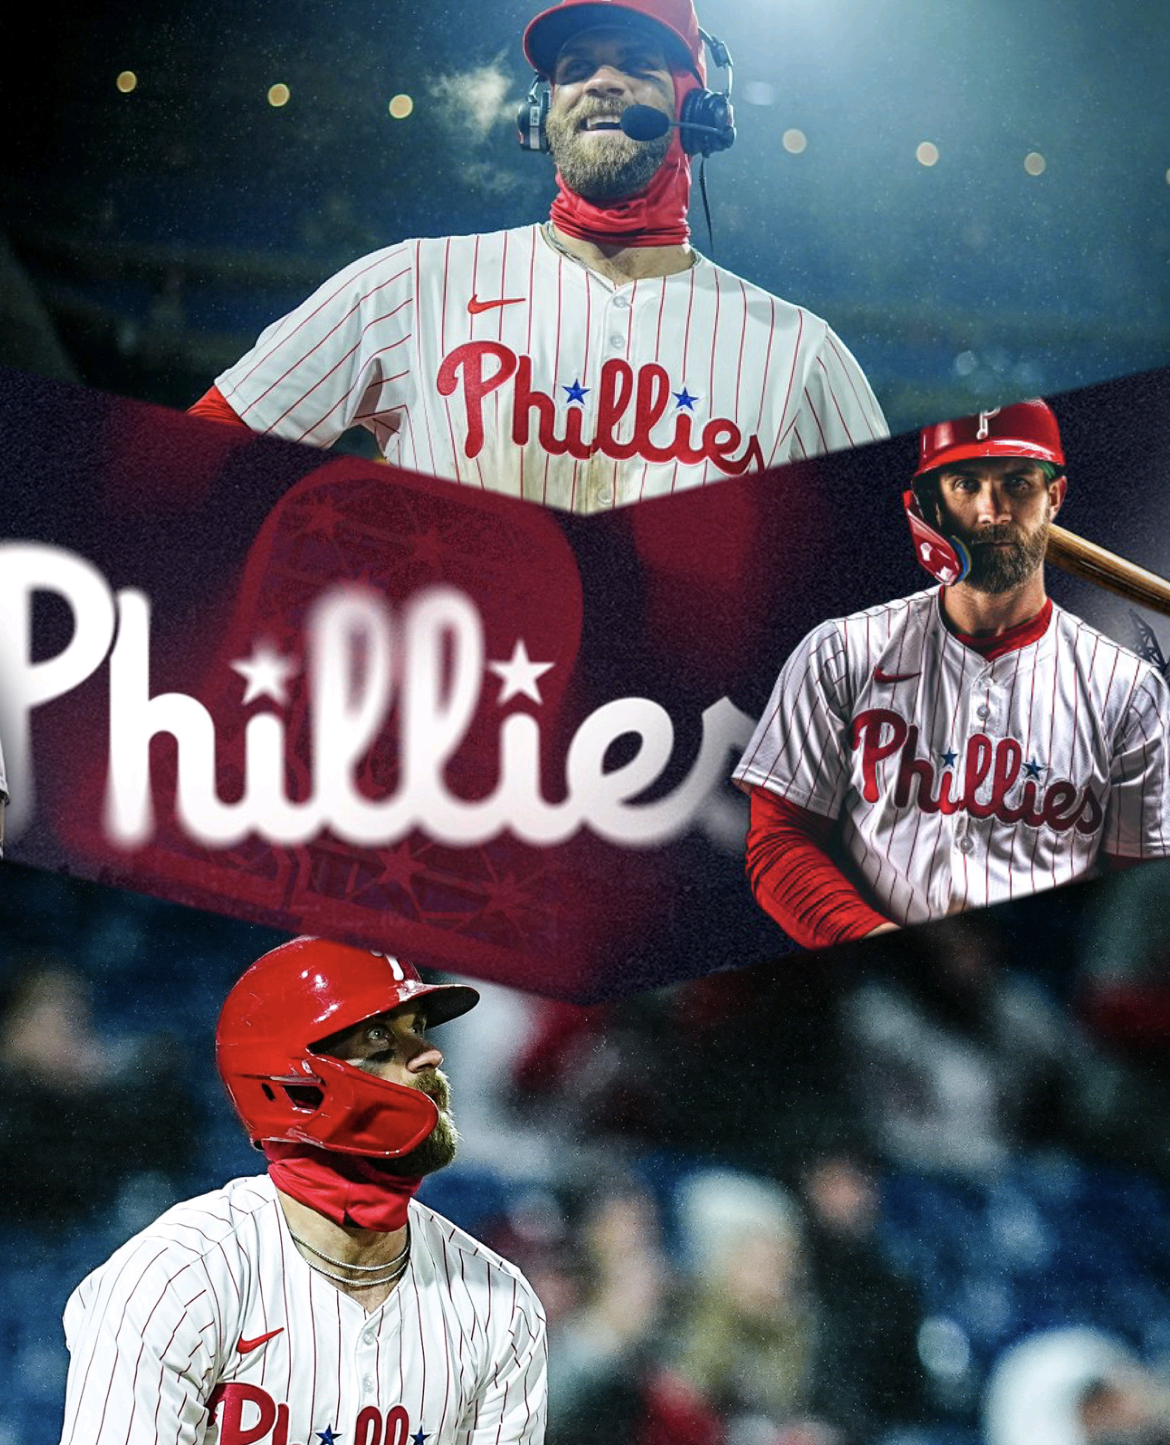 Phillies Bryce Harper 1000th Run and Second 3-Homer Game